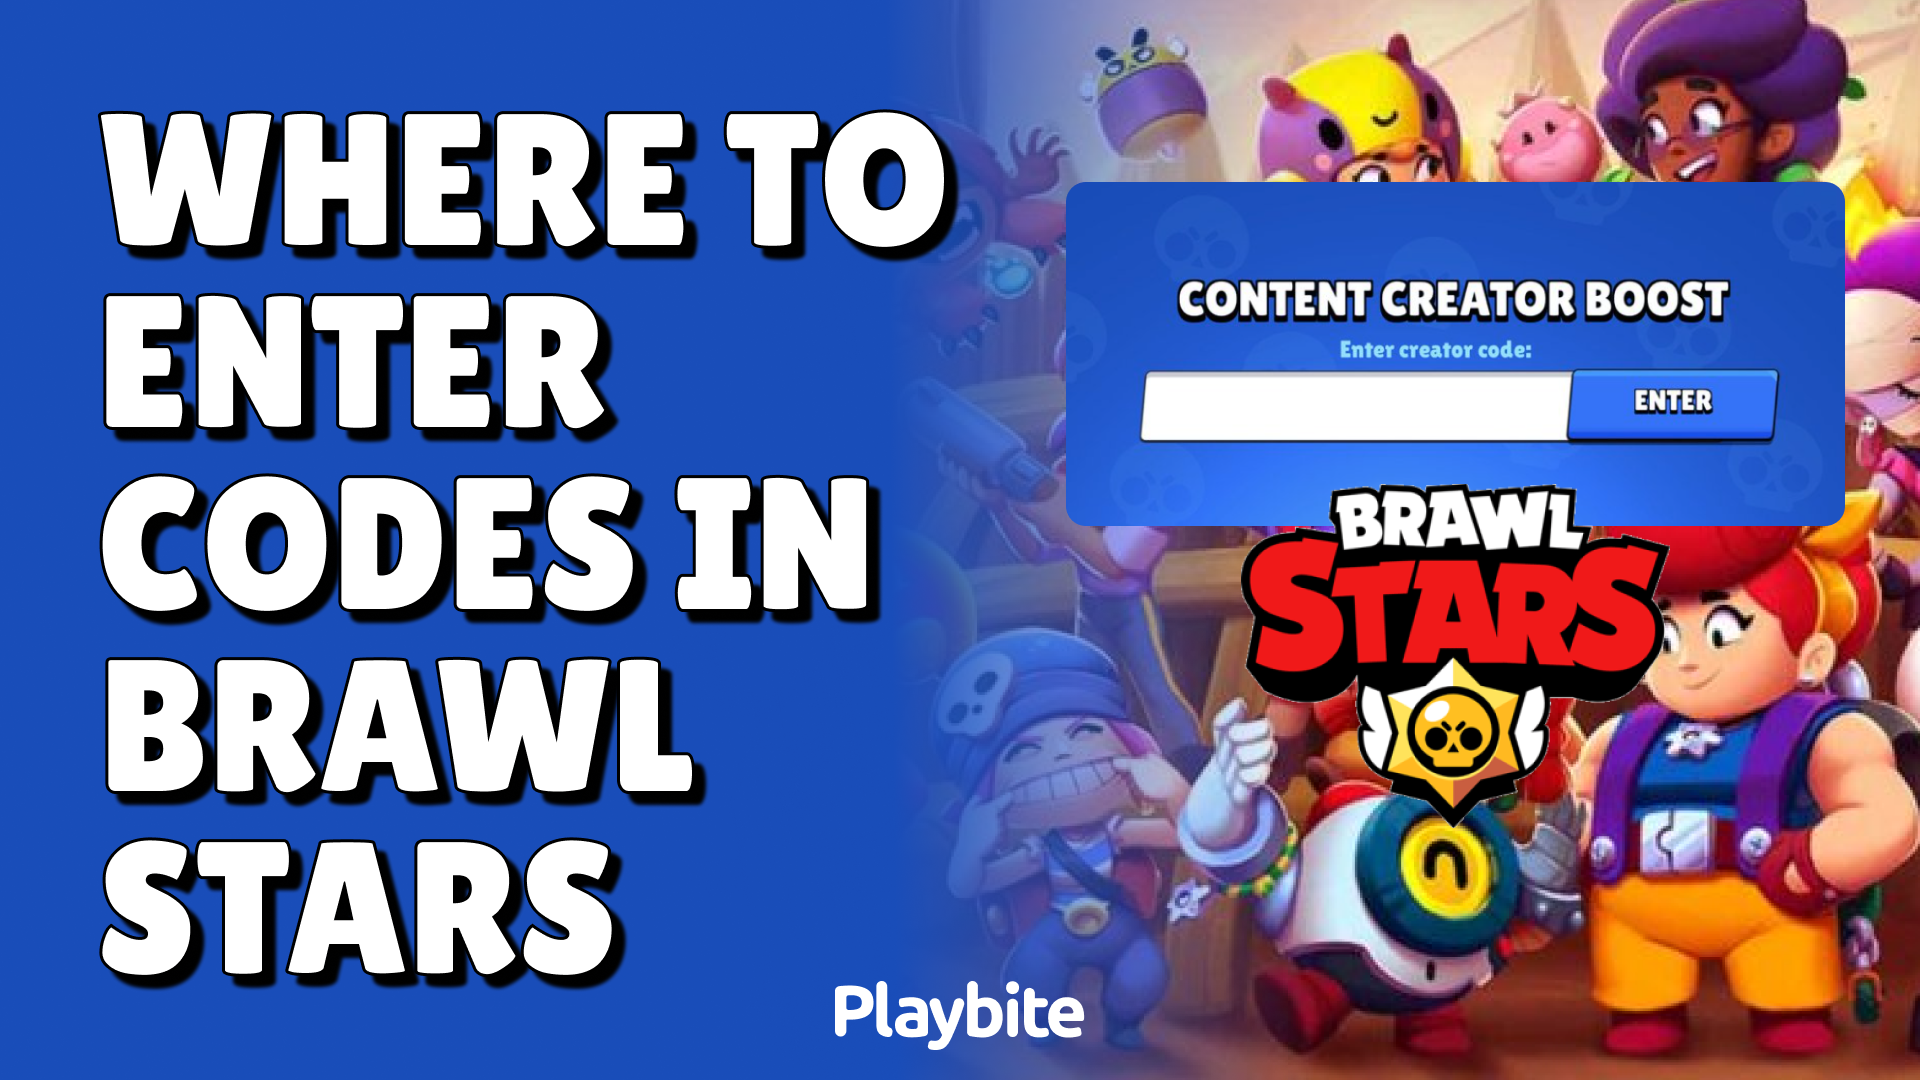 Where to Enter Codes in Brawl Stars: A Quick Guide